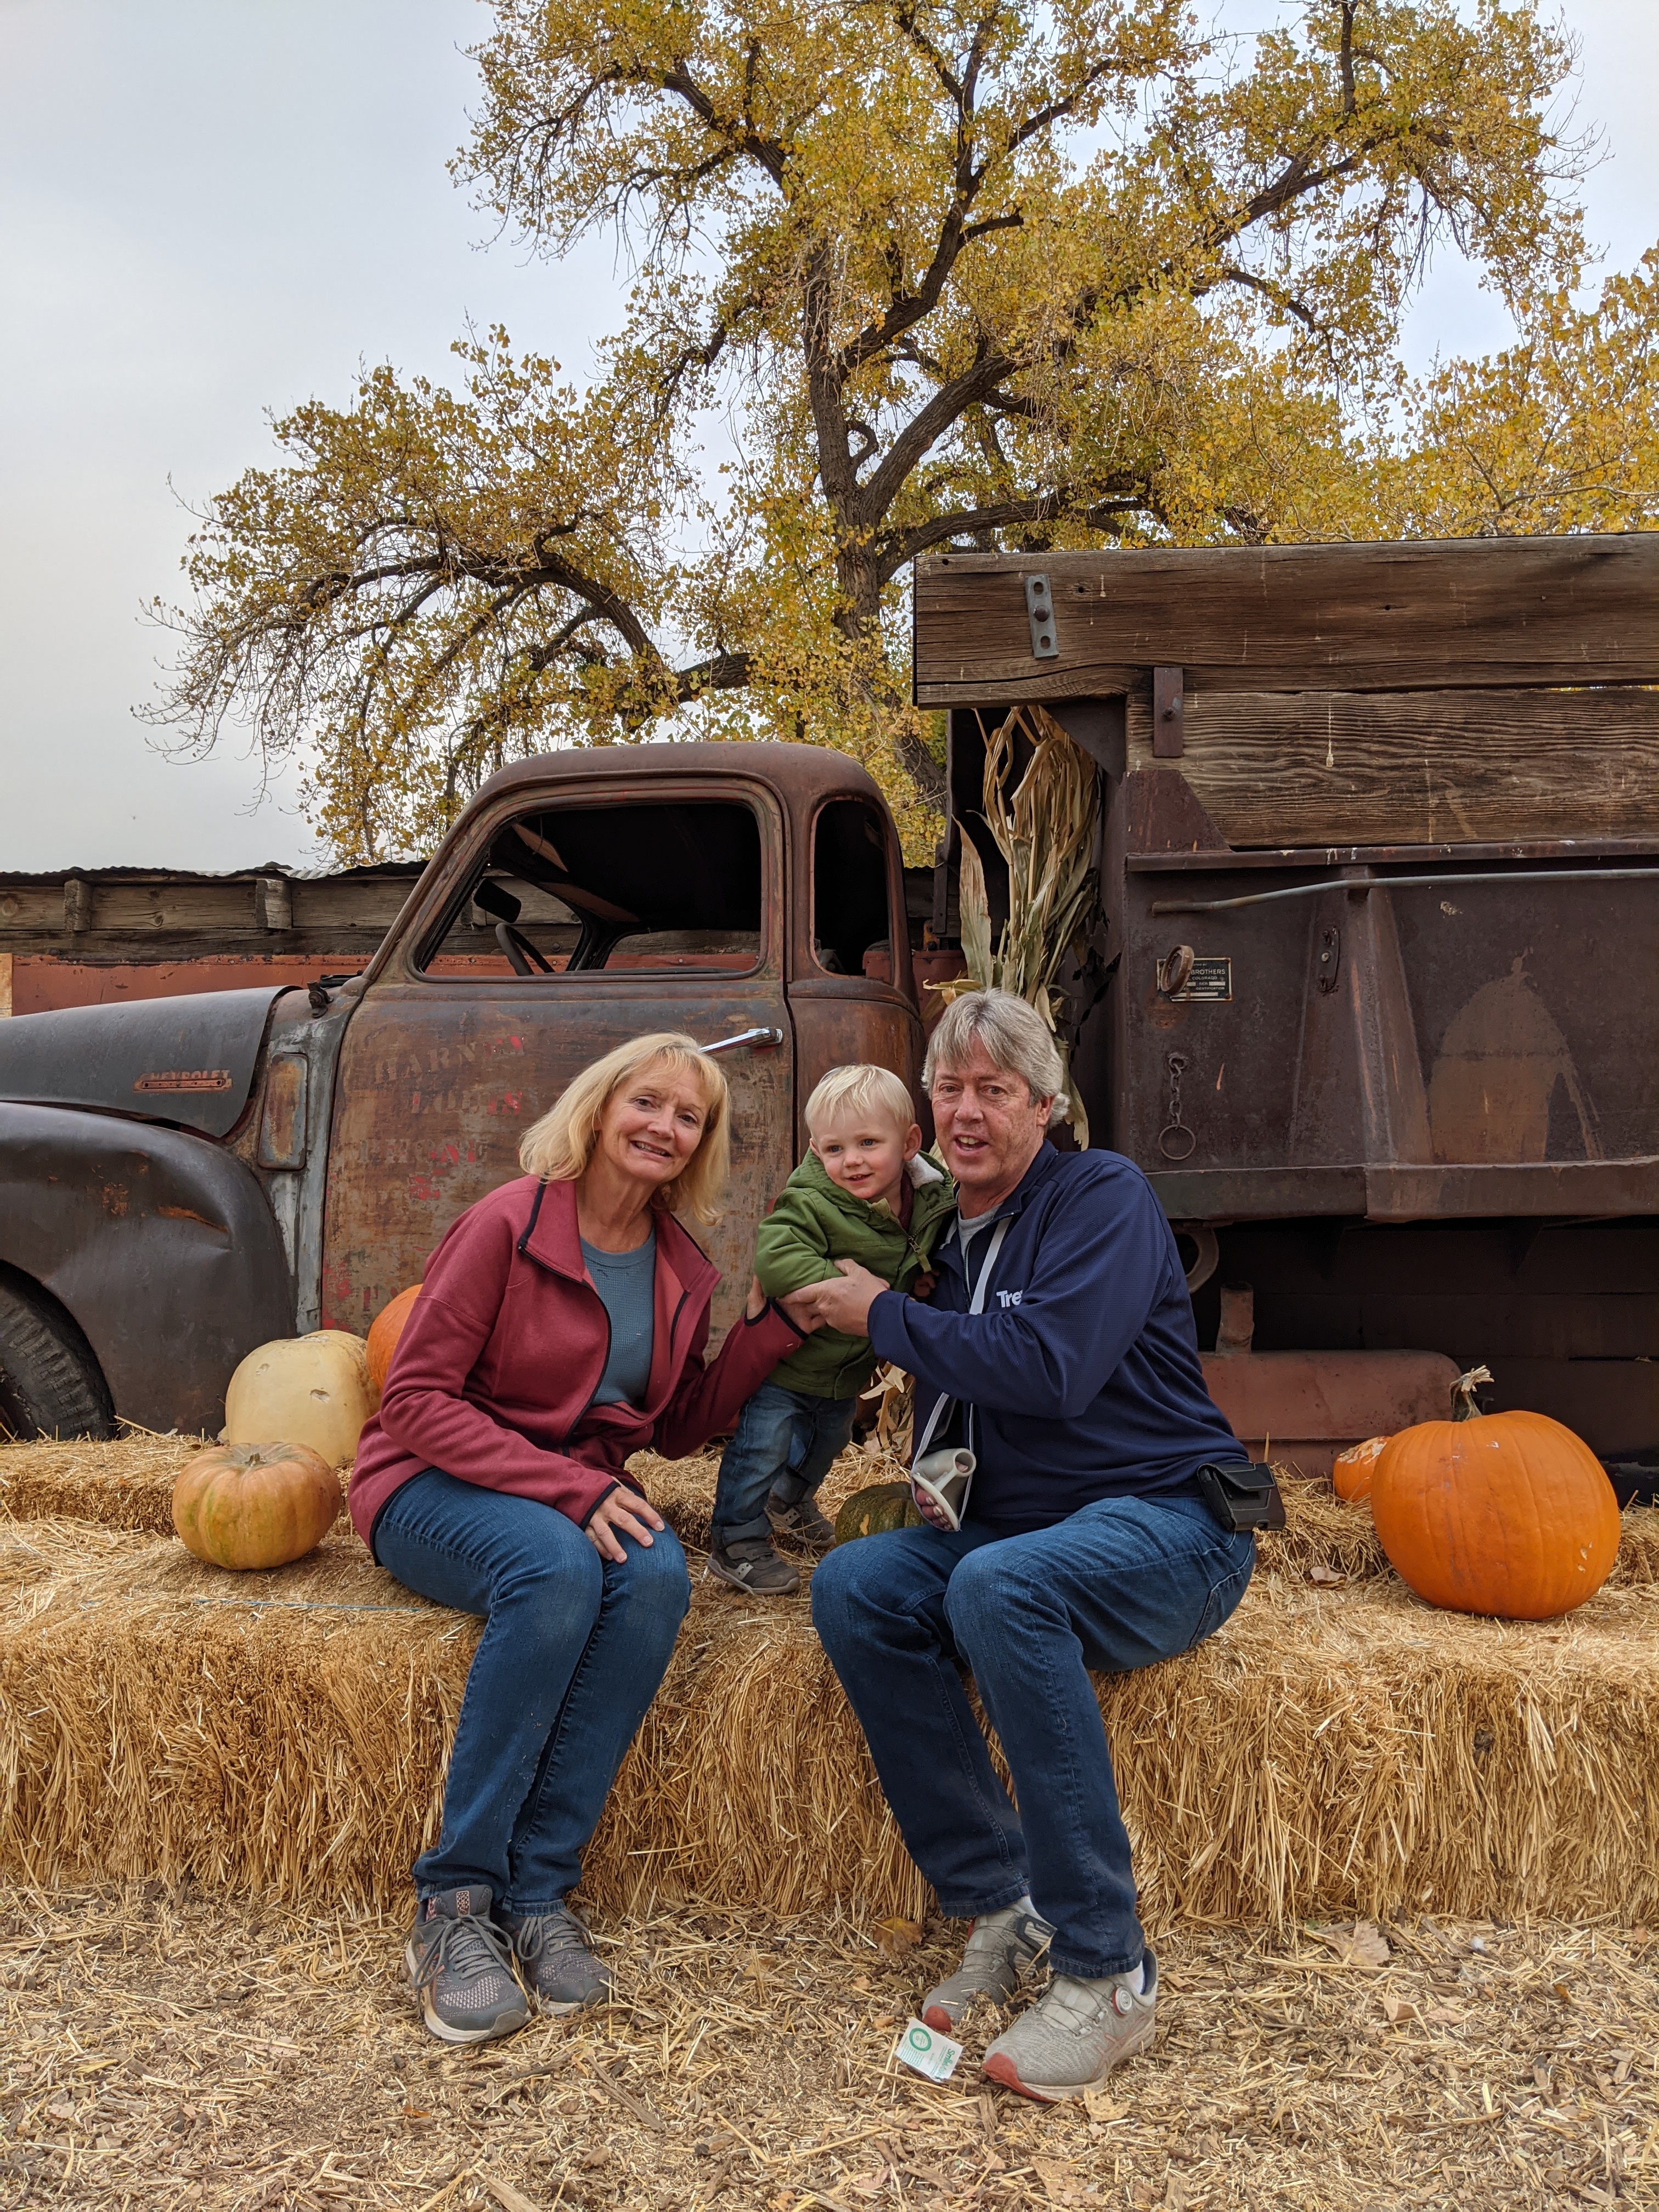 Owen at the pumpkin patch with Grandma Vickie and Grandpa Kim.